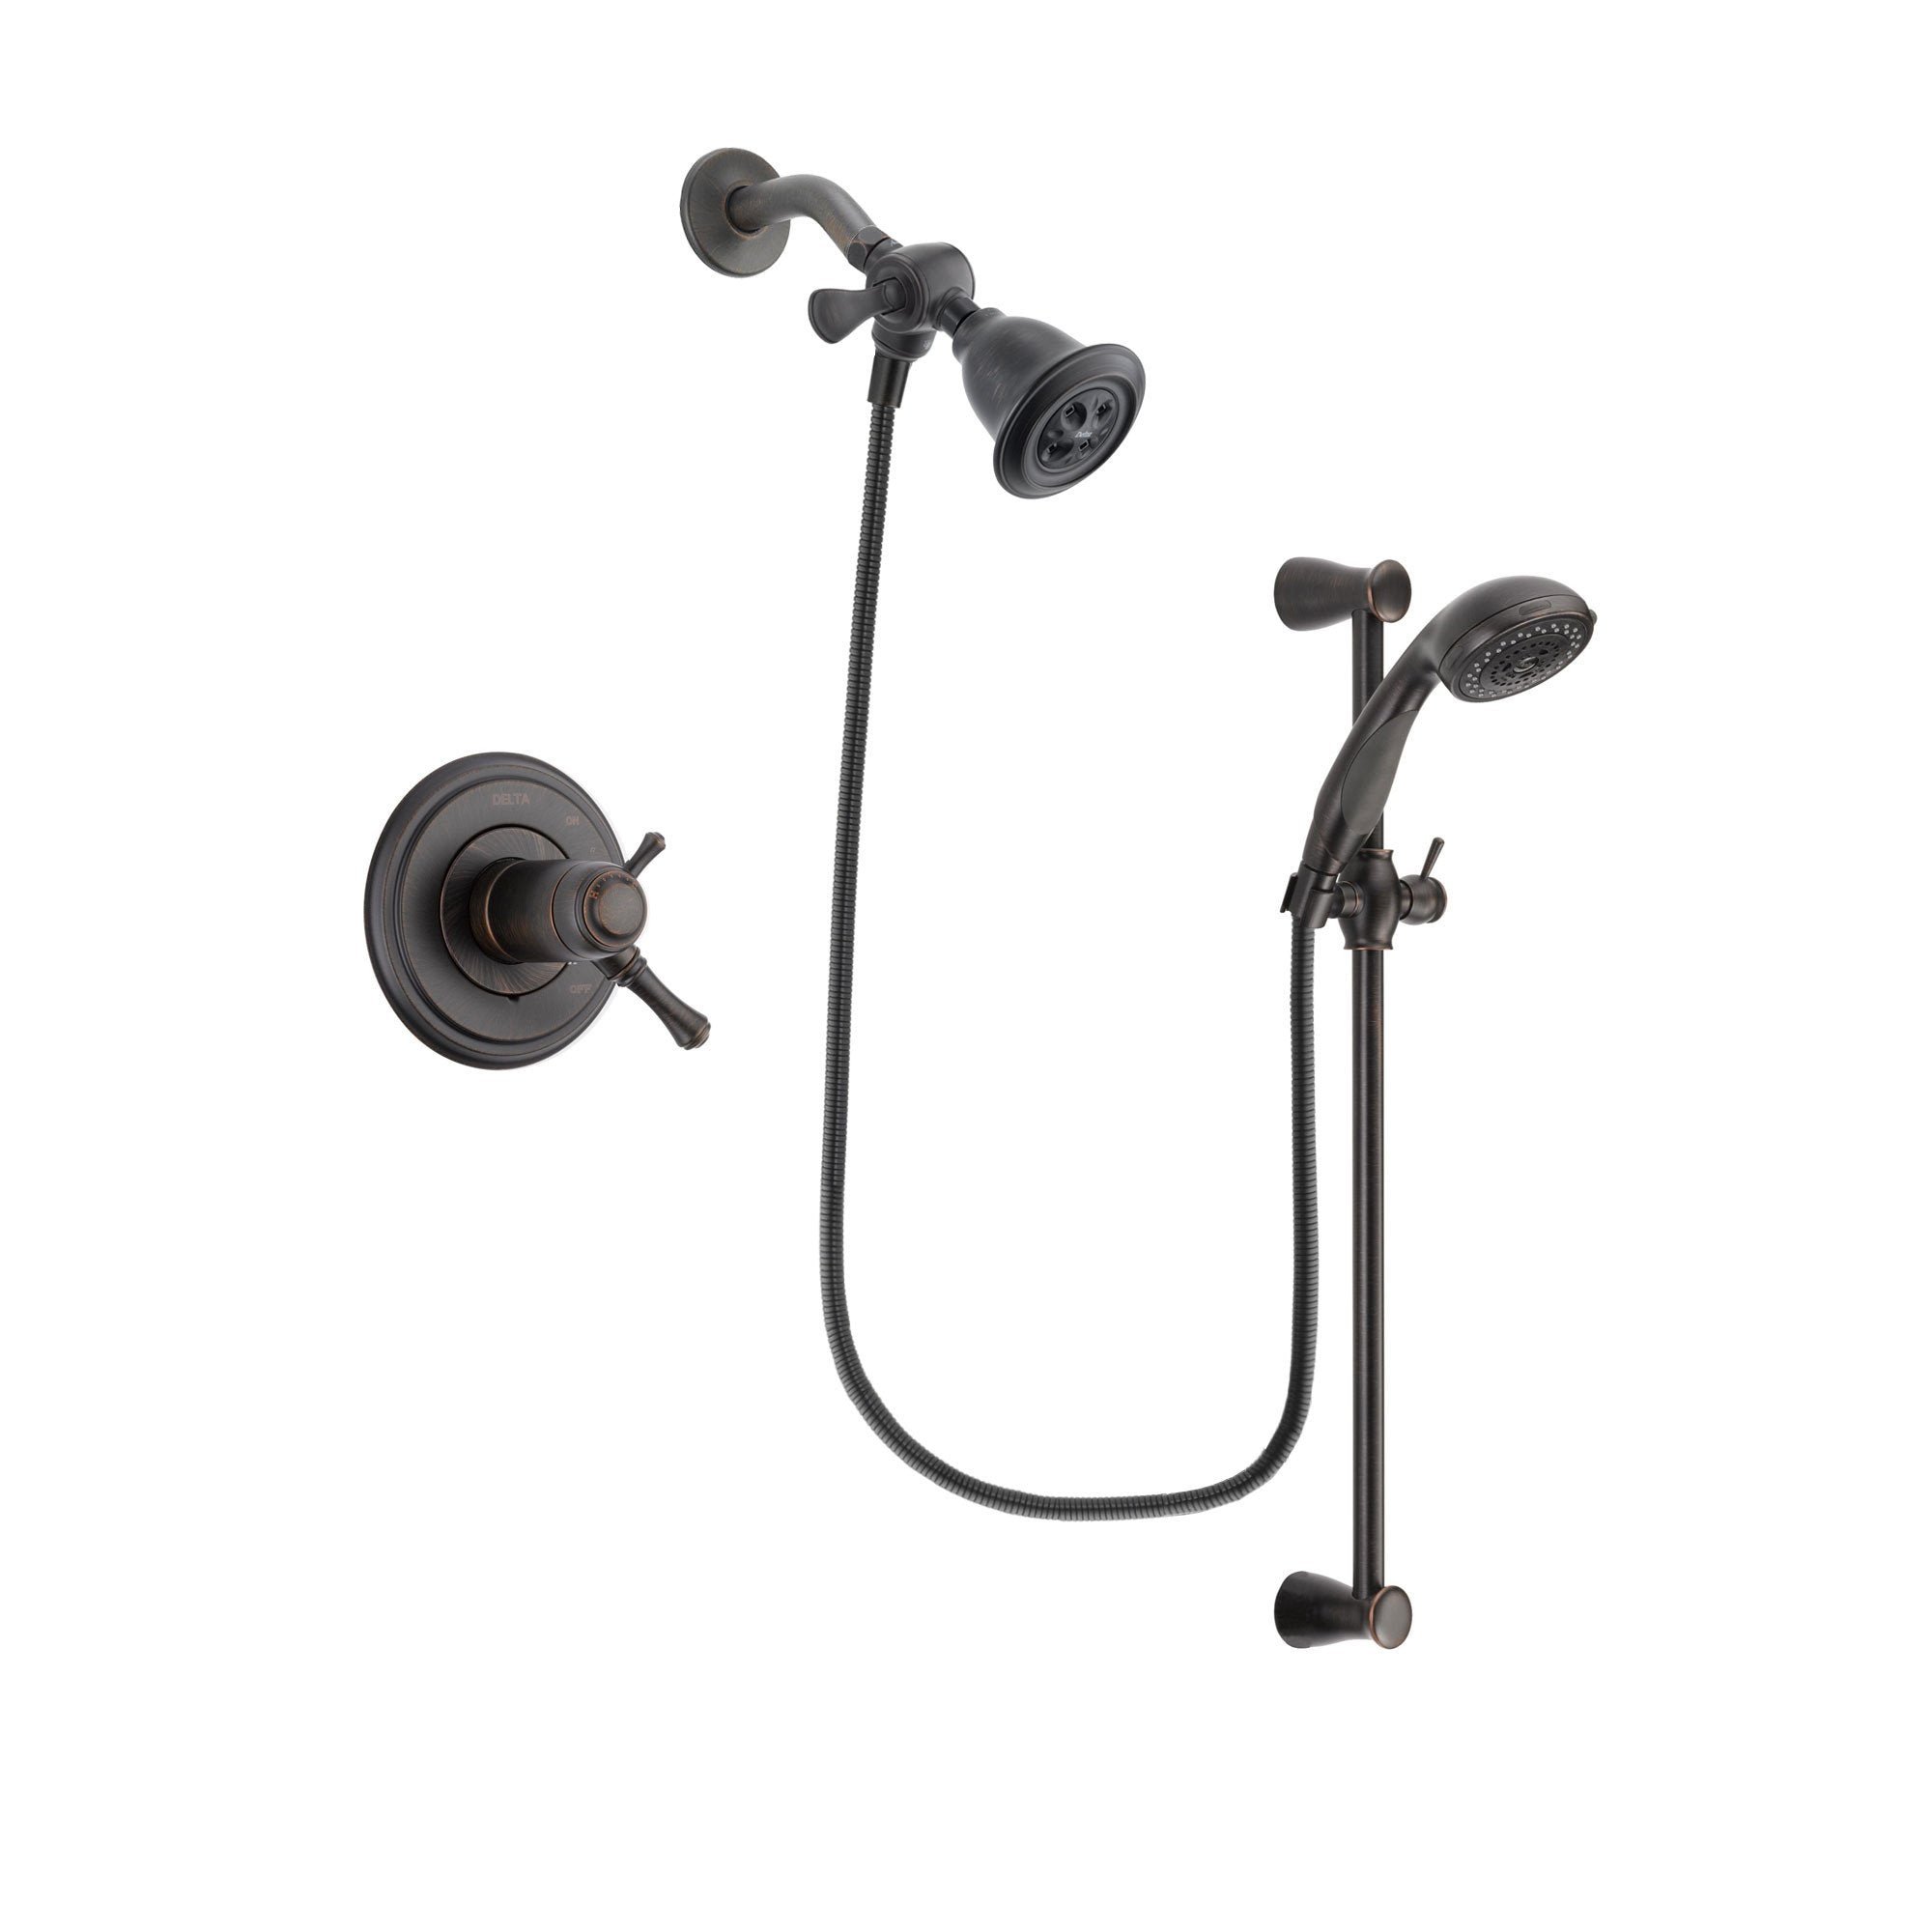 Delta Cassidy Venetian Bronze Finish Thermostatic Shower Faucet System Package with Water Efficient Showerhead and Personal Handheld Shower Spray with Slide Bar Includes Rough-in Valve DSP2660V